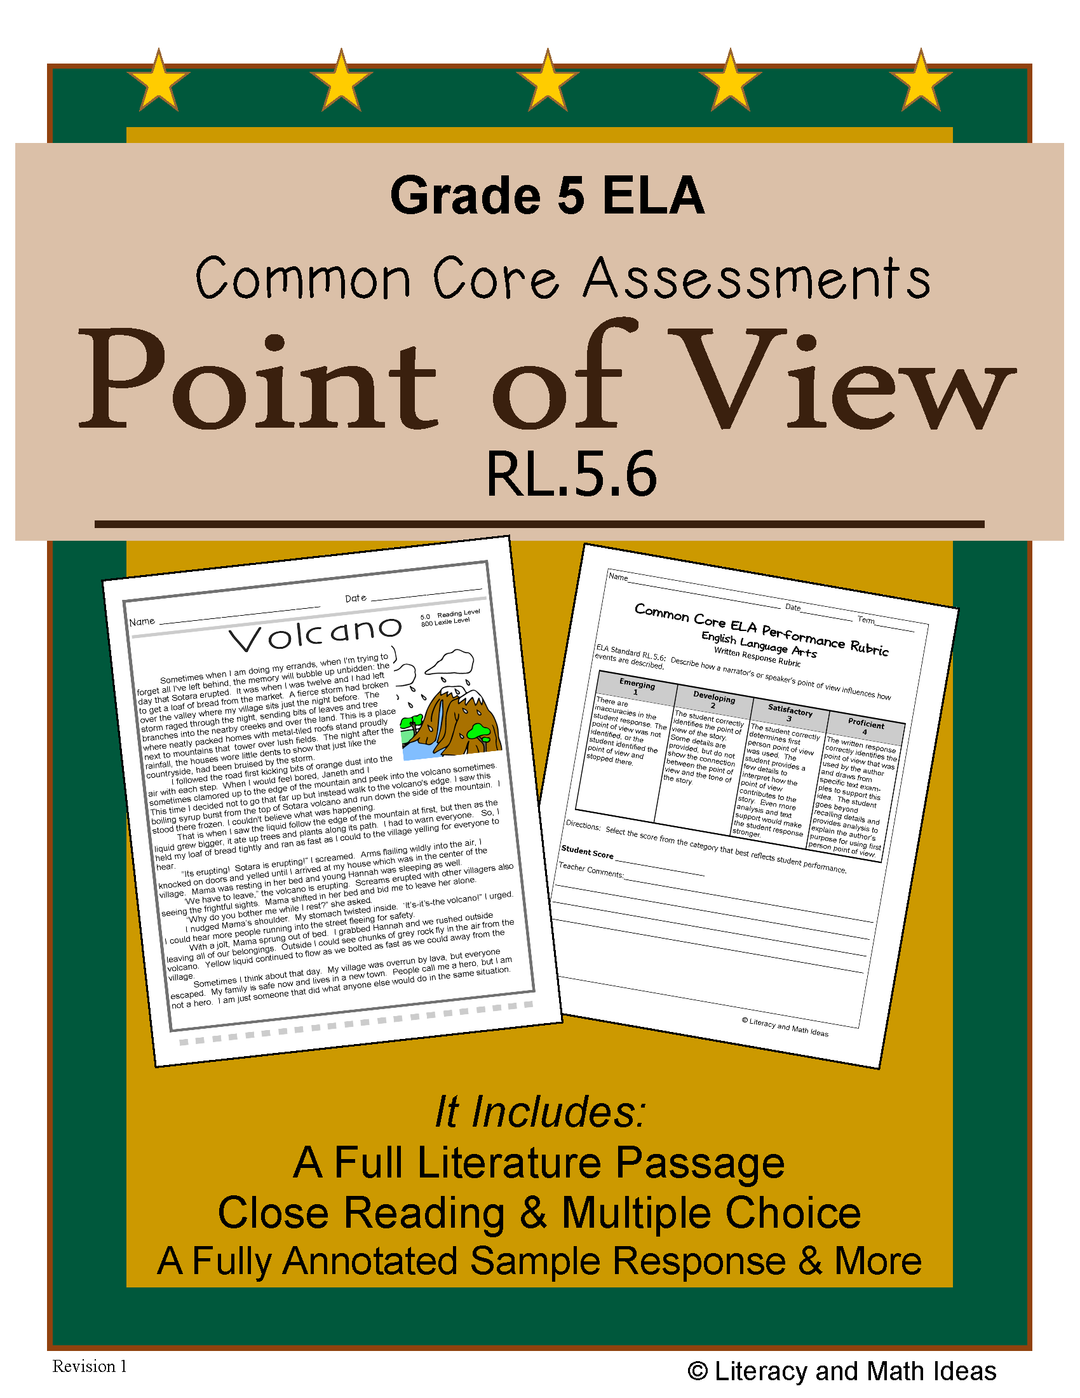 Grade 5 Common Core Assessments: Point of View RL.5.6